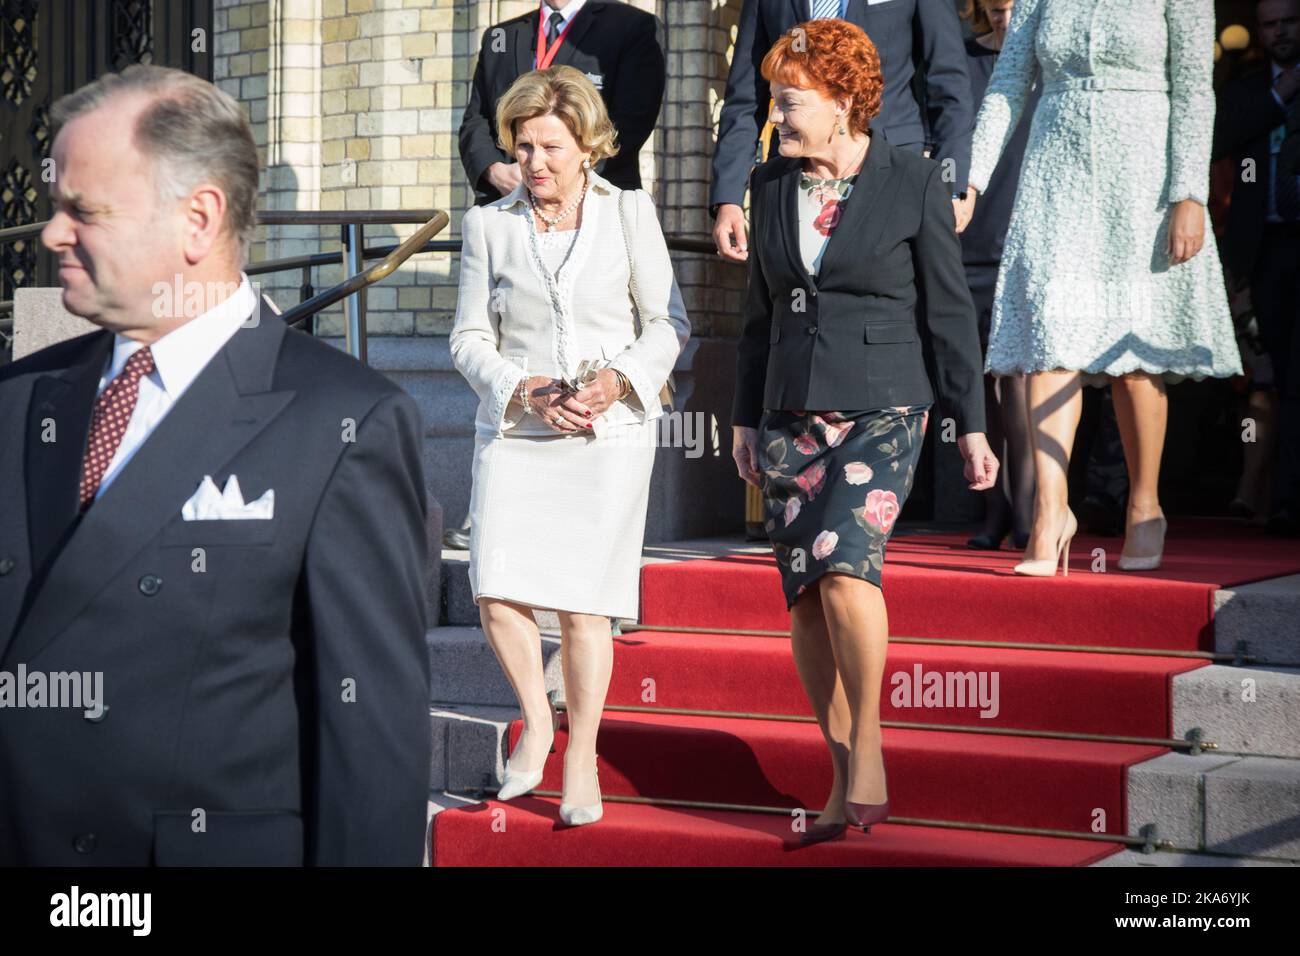 Oslo, Norway 20170918. Queen Sonja and first Vice President of the Storting, Marit Nybakk after the unveiling of the King and Queen's 80th anniversary gift from the Storting (Parliament) on Monday. The gift is a painting by Kira Wager called 'King Olav V's Oath for the Storting'. Photo: Audun Braastad / NTB scanpi Stock Photo